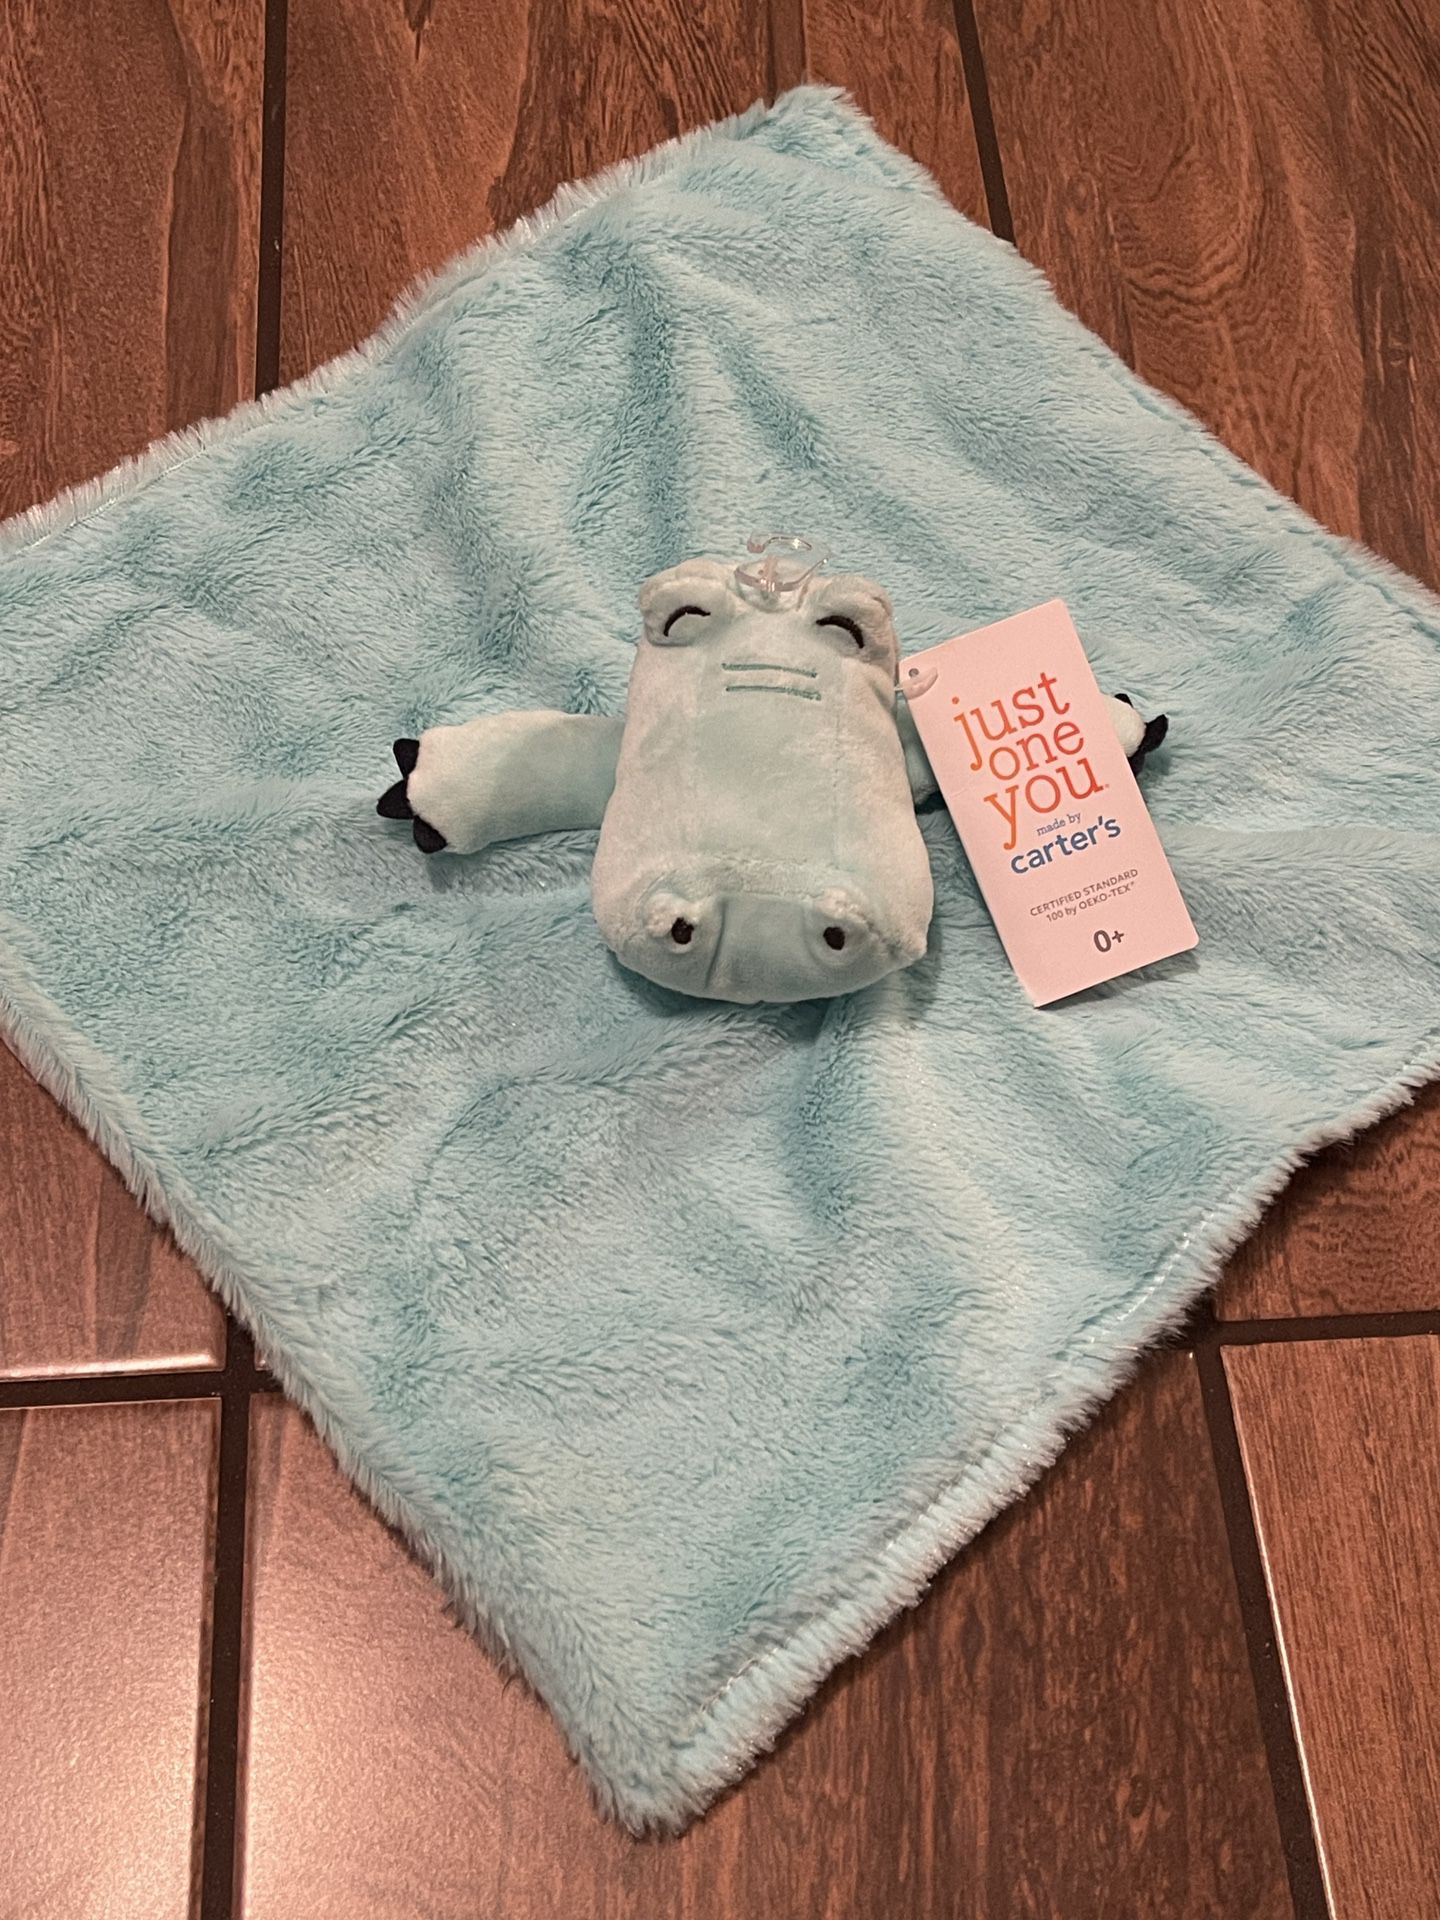 Baby Snuggle-Security Blanket New With Tags $5